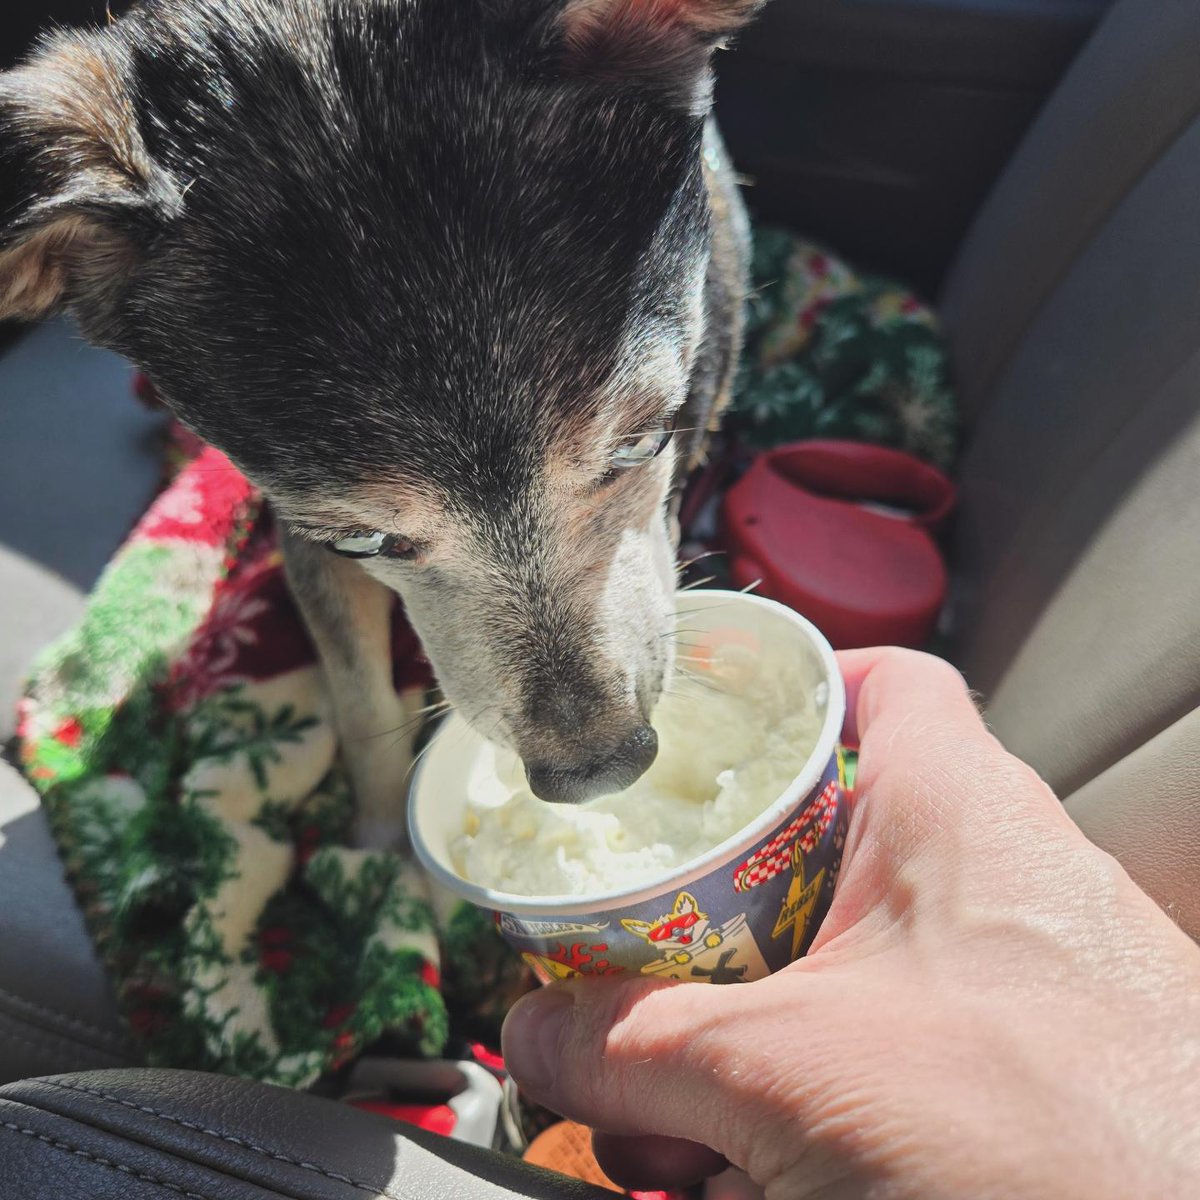 Thanks @DutchBros for Jeepy's pup cup after the vet. He needed it! ❤️ 
#rescuedogsrule #coffeeforme #whippedcreamforJeepy